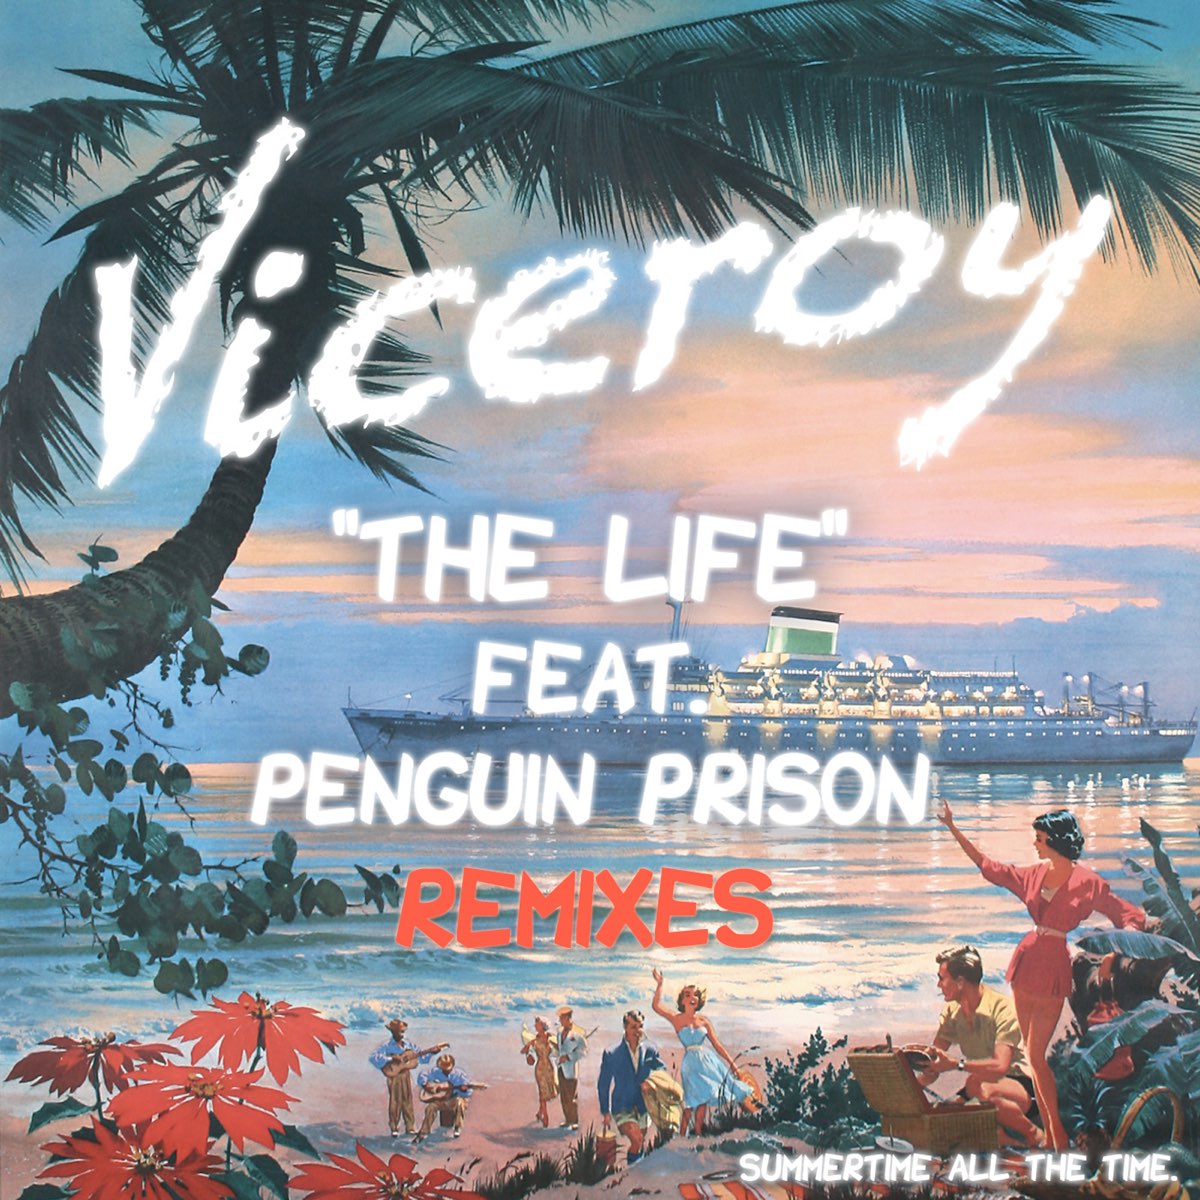 Disco inferno viceroy jet life remix. Life. Viceroy песня. Show me the way Penguin Prison. Afterlife, the album the Single Remixes, the Journey.